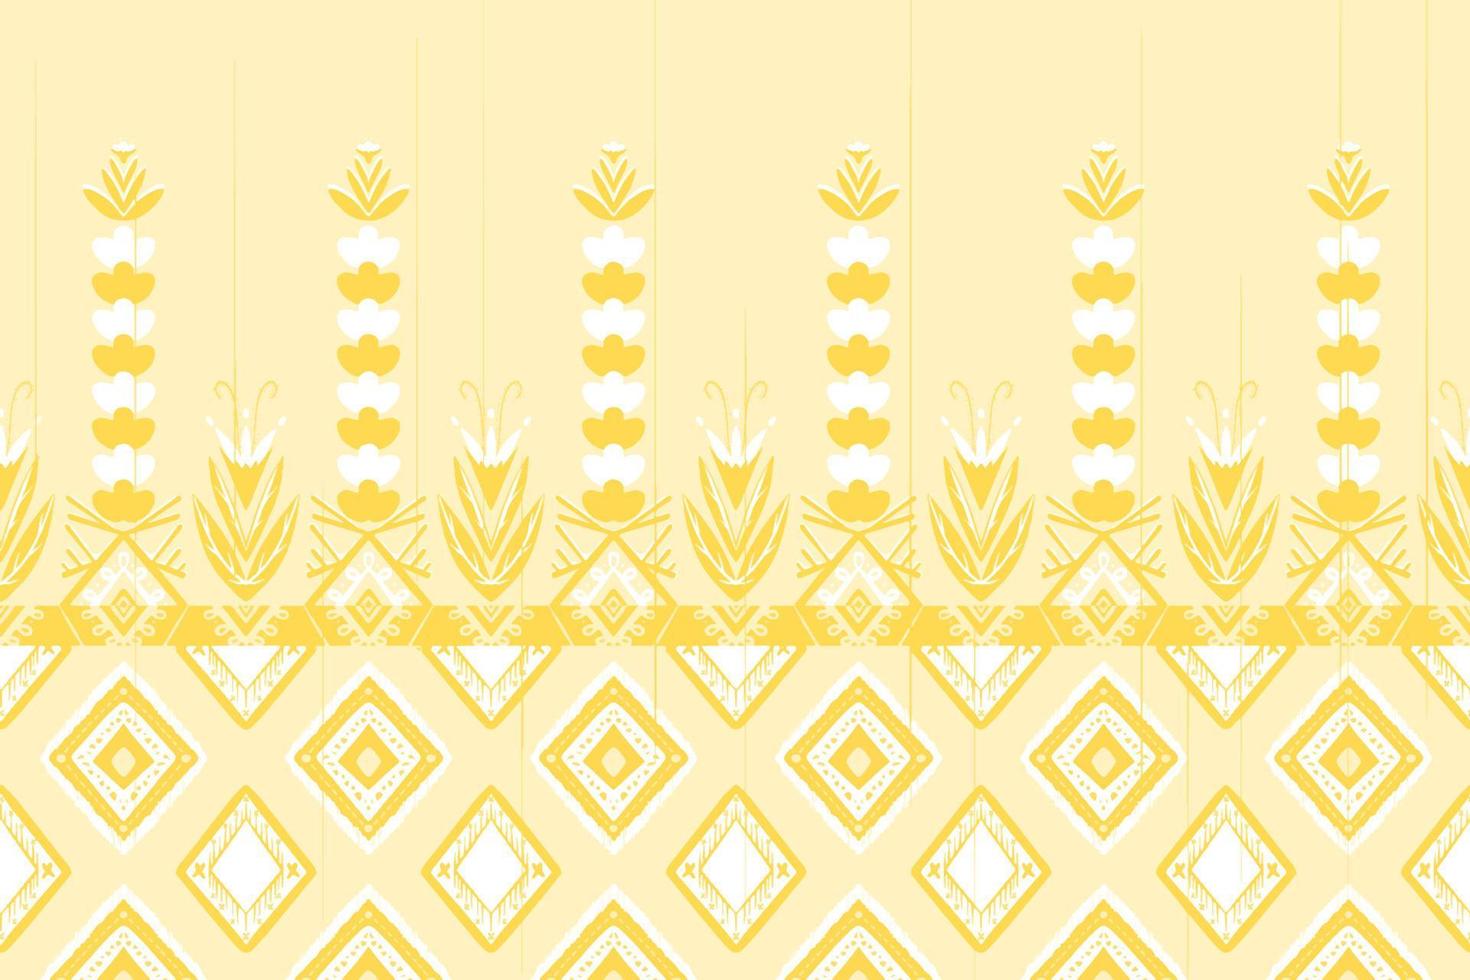 Yellow and White Flower on Ivory. Geometric ethnic oriental pattern traditional Design for background,carpet,wallpaper,clothing,wrapping,Batik,fabric, vector illustration embroidery style